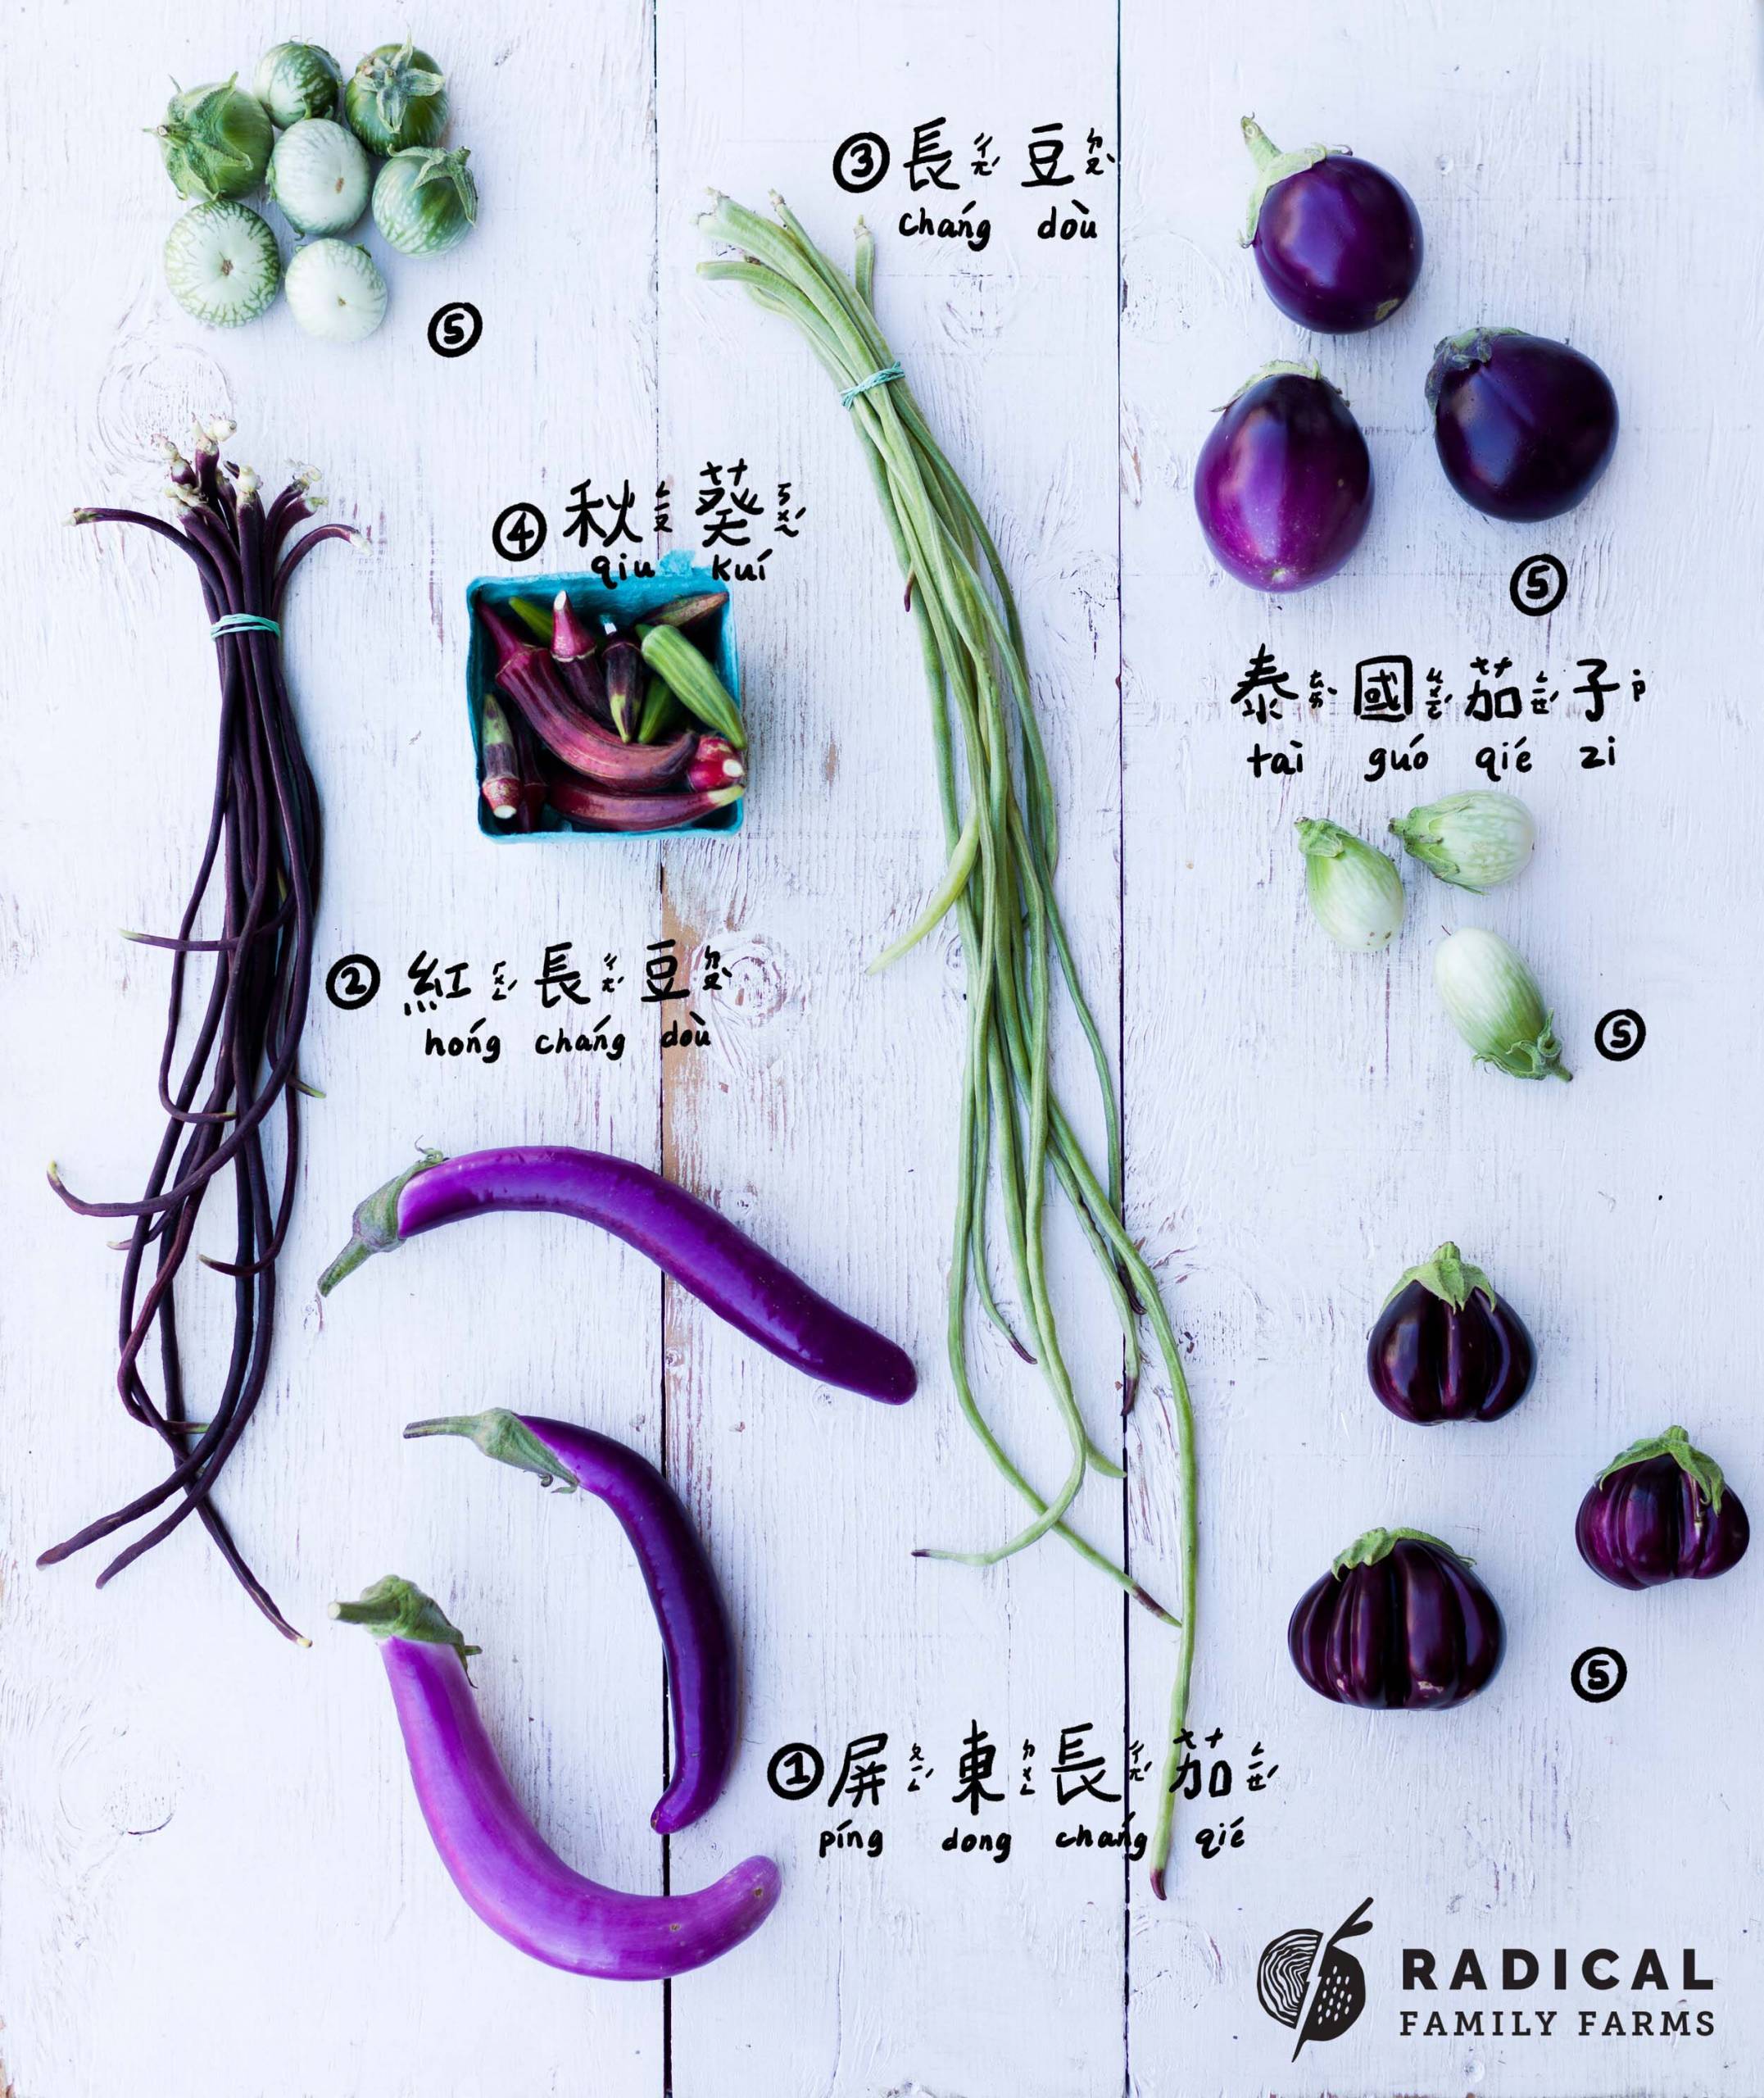 The vegetables from a CSA produce box, including long beans, okra and several varieties of eggplant, arranged artfully on a white wooden board.